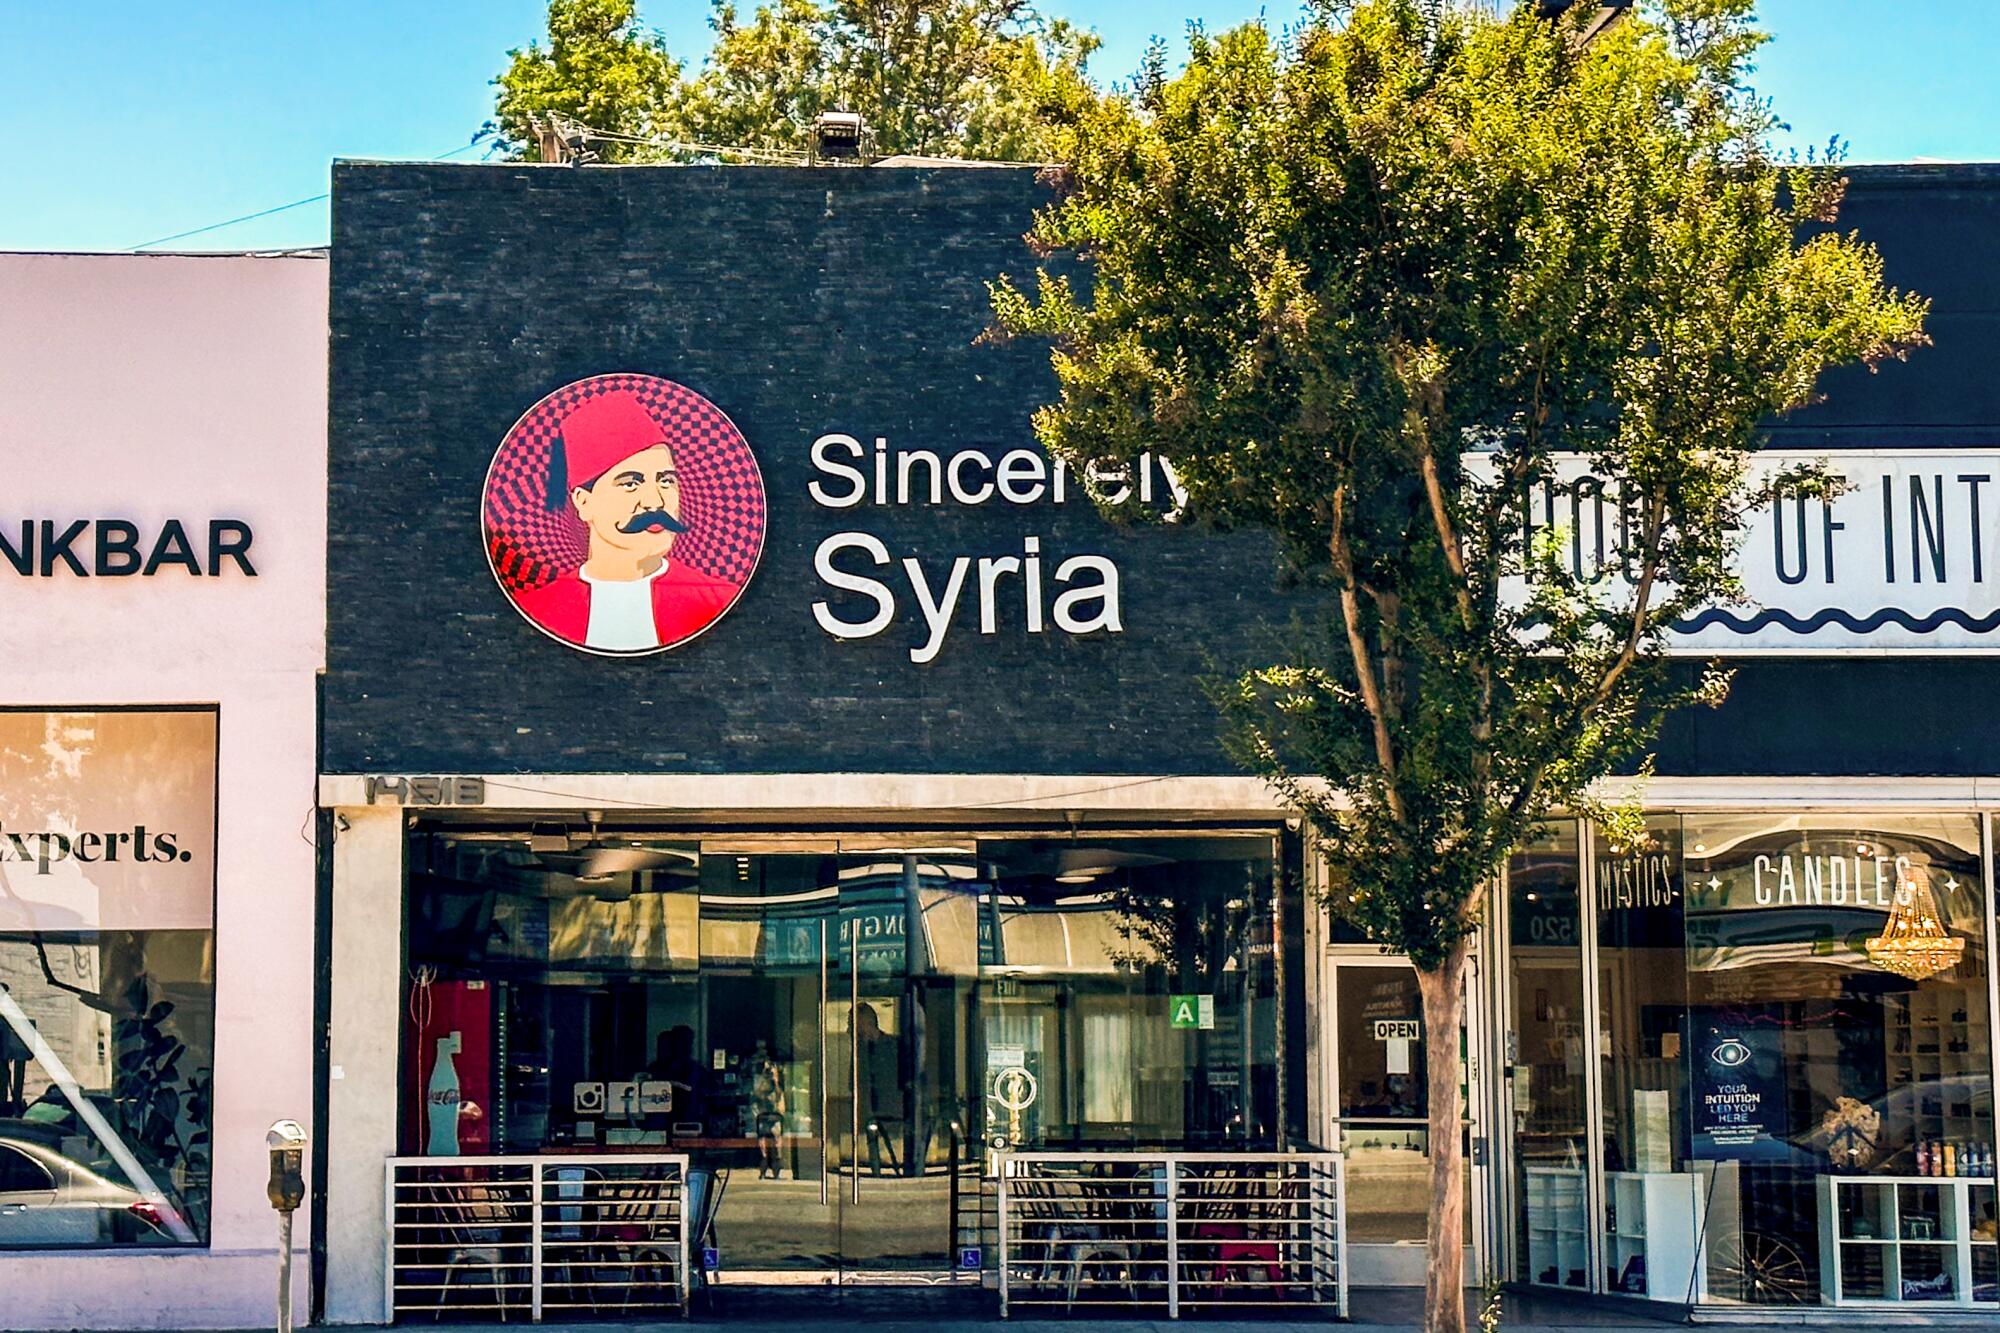 Sincerely Syria storefront.